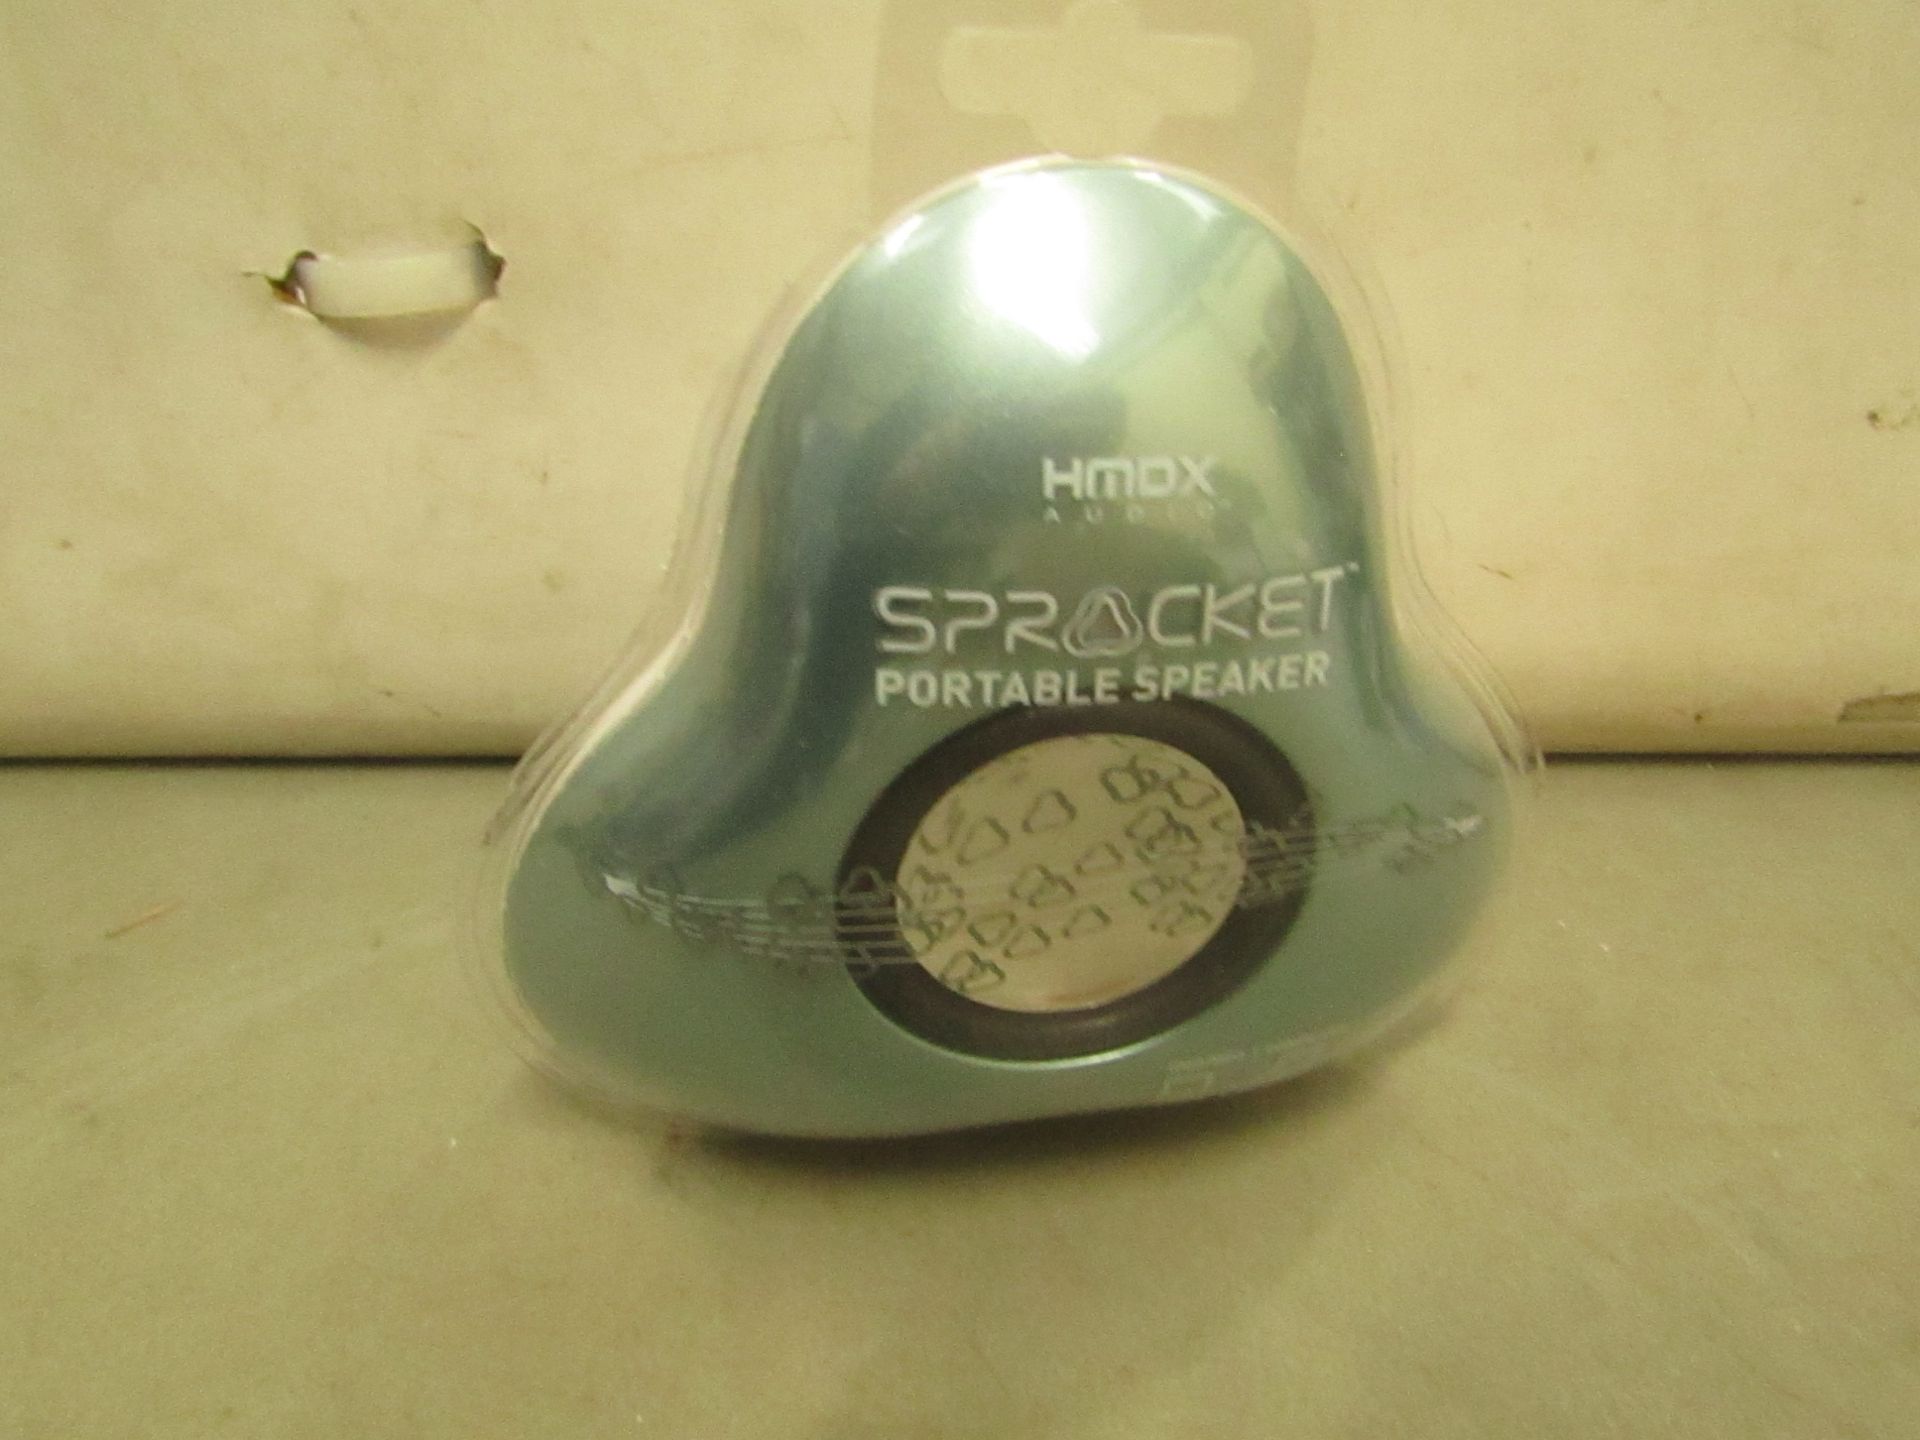 2x Sprocket - Portable Speaker - Assorted Colours - New & Packaged. Picked At Random.